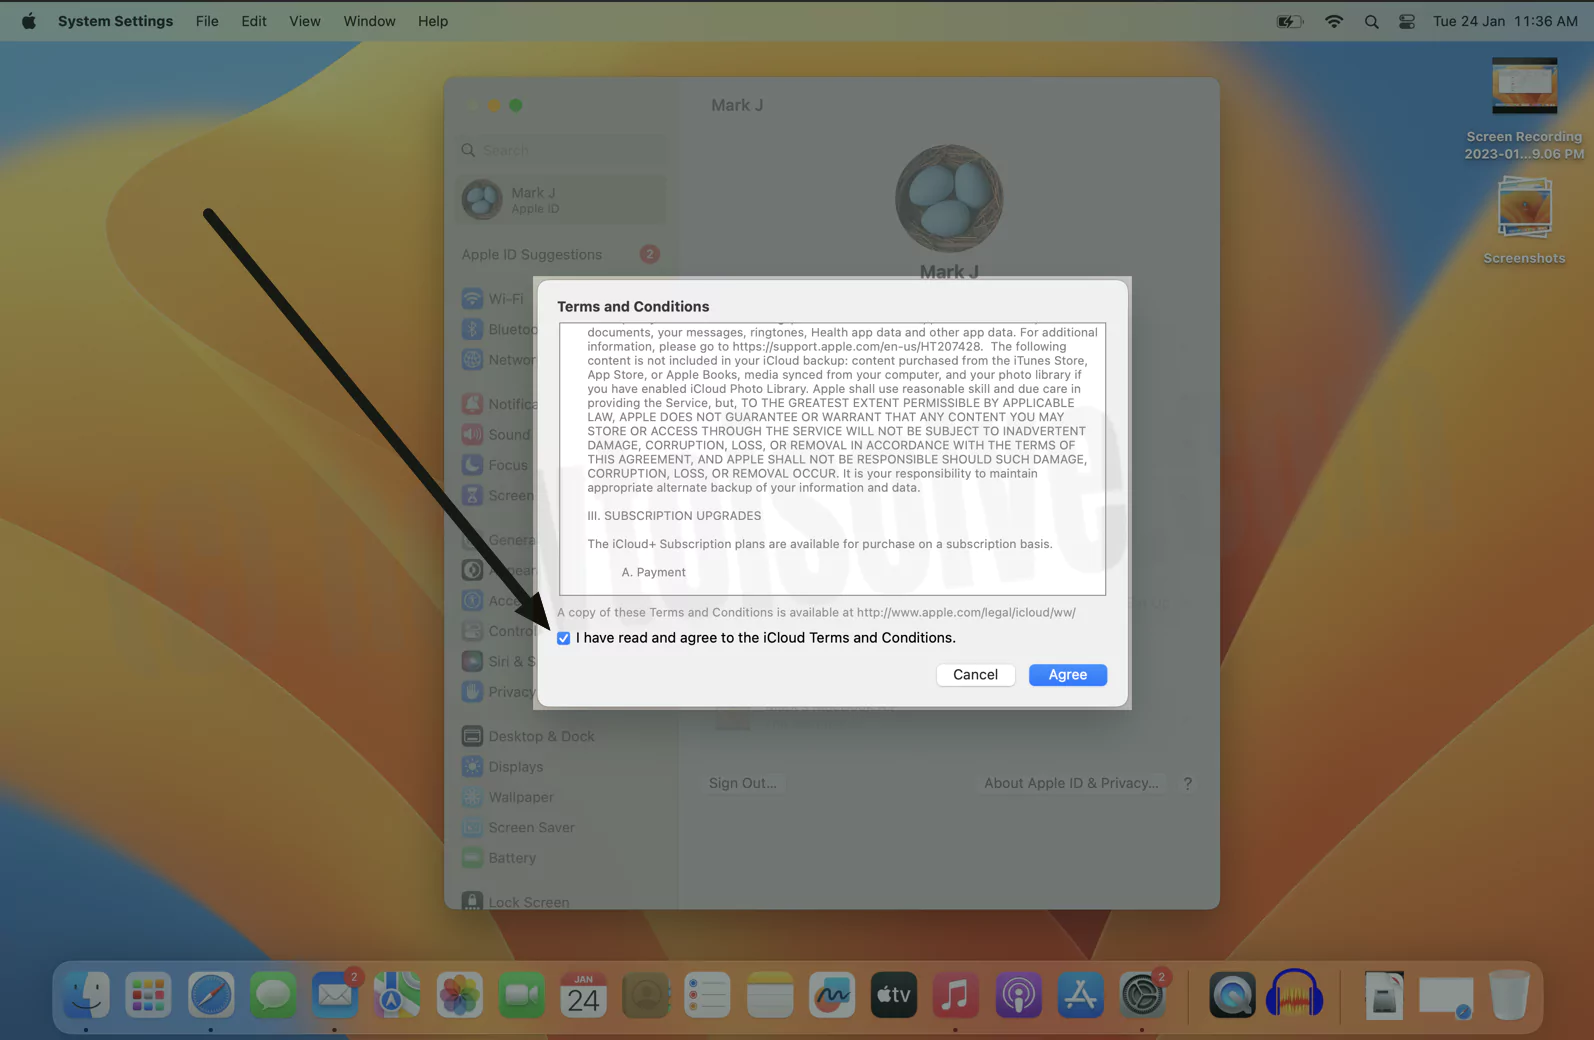 accept-new-icloud-terms-and-conditions-agree-button-grayed-out